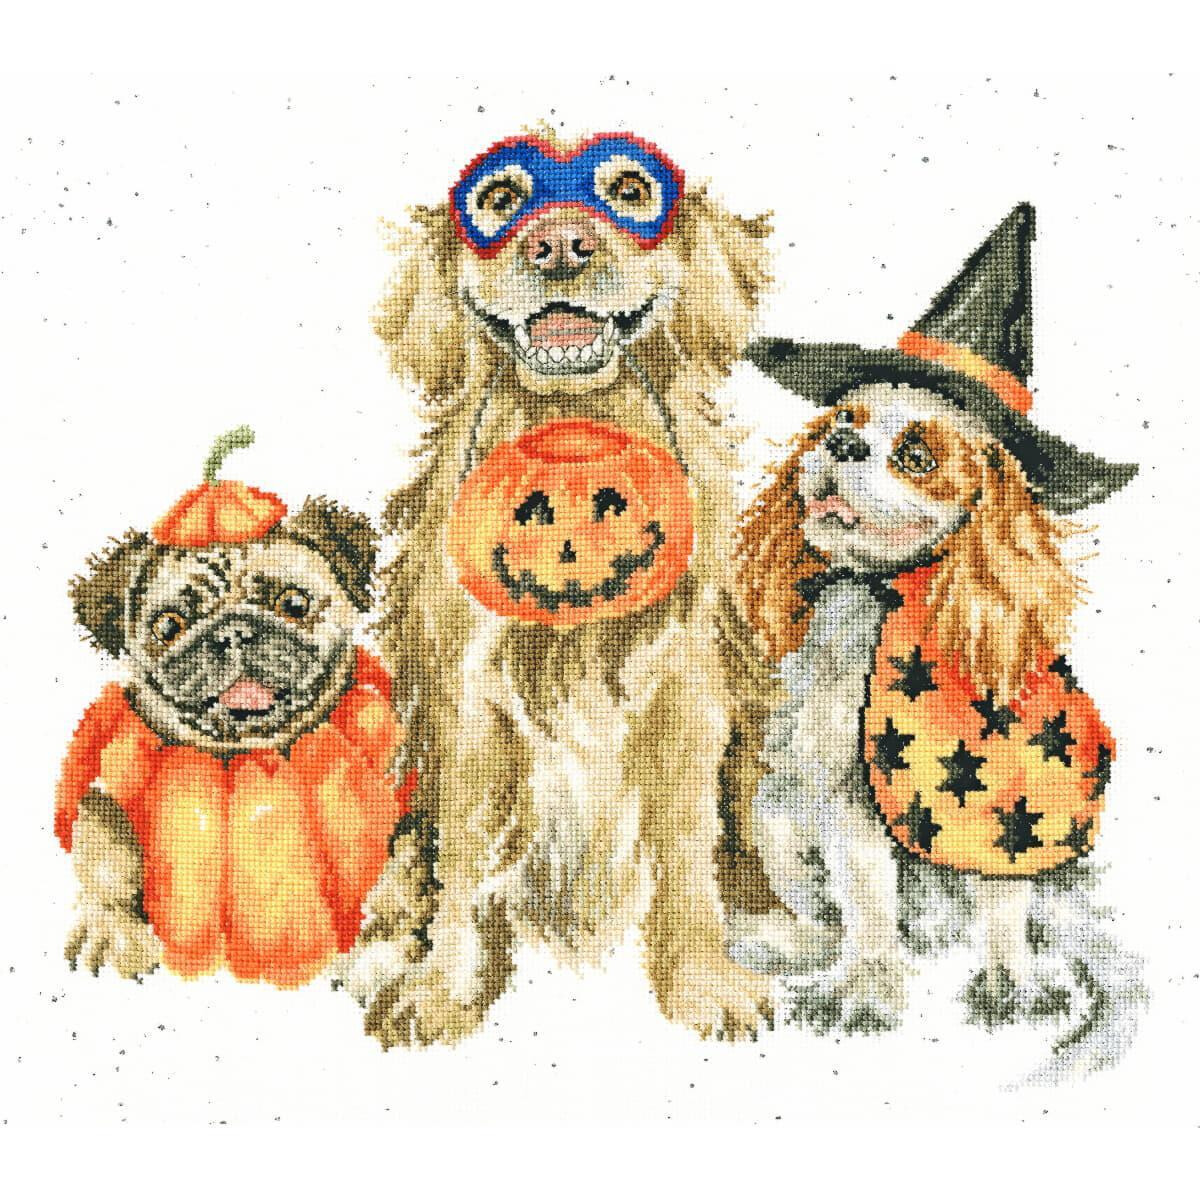 Three dogs in Halloween costumes sit together. The dog on...